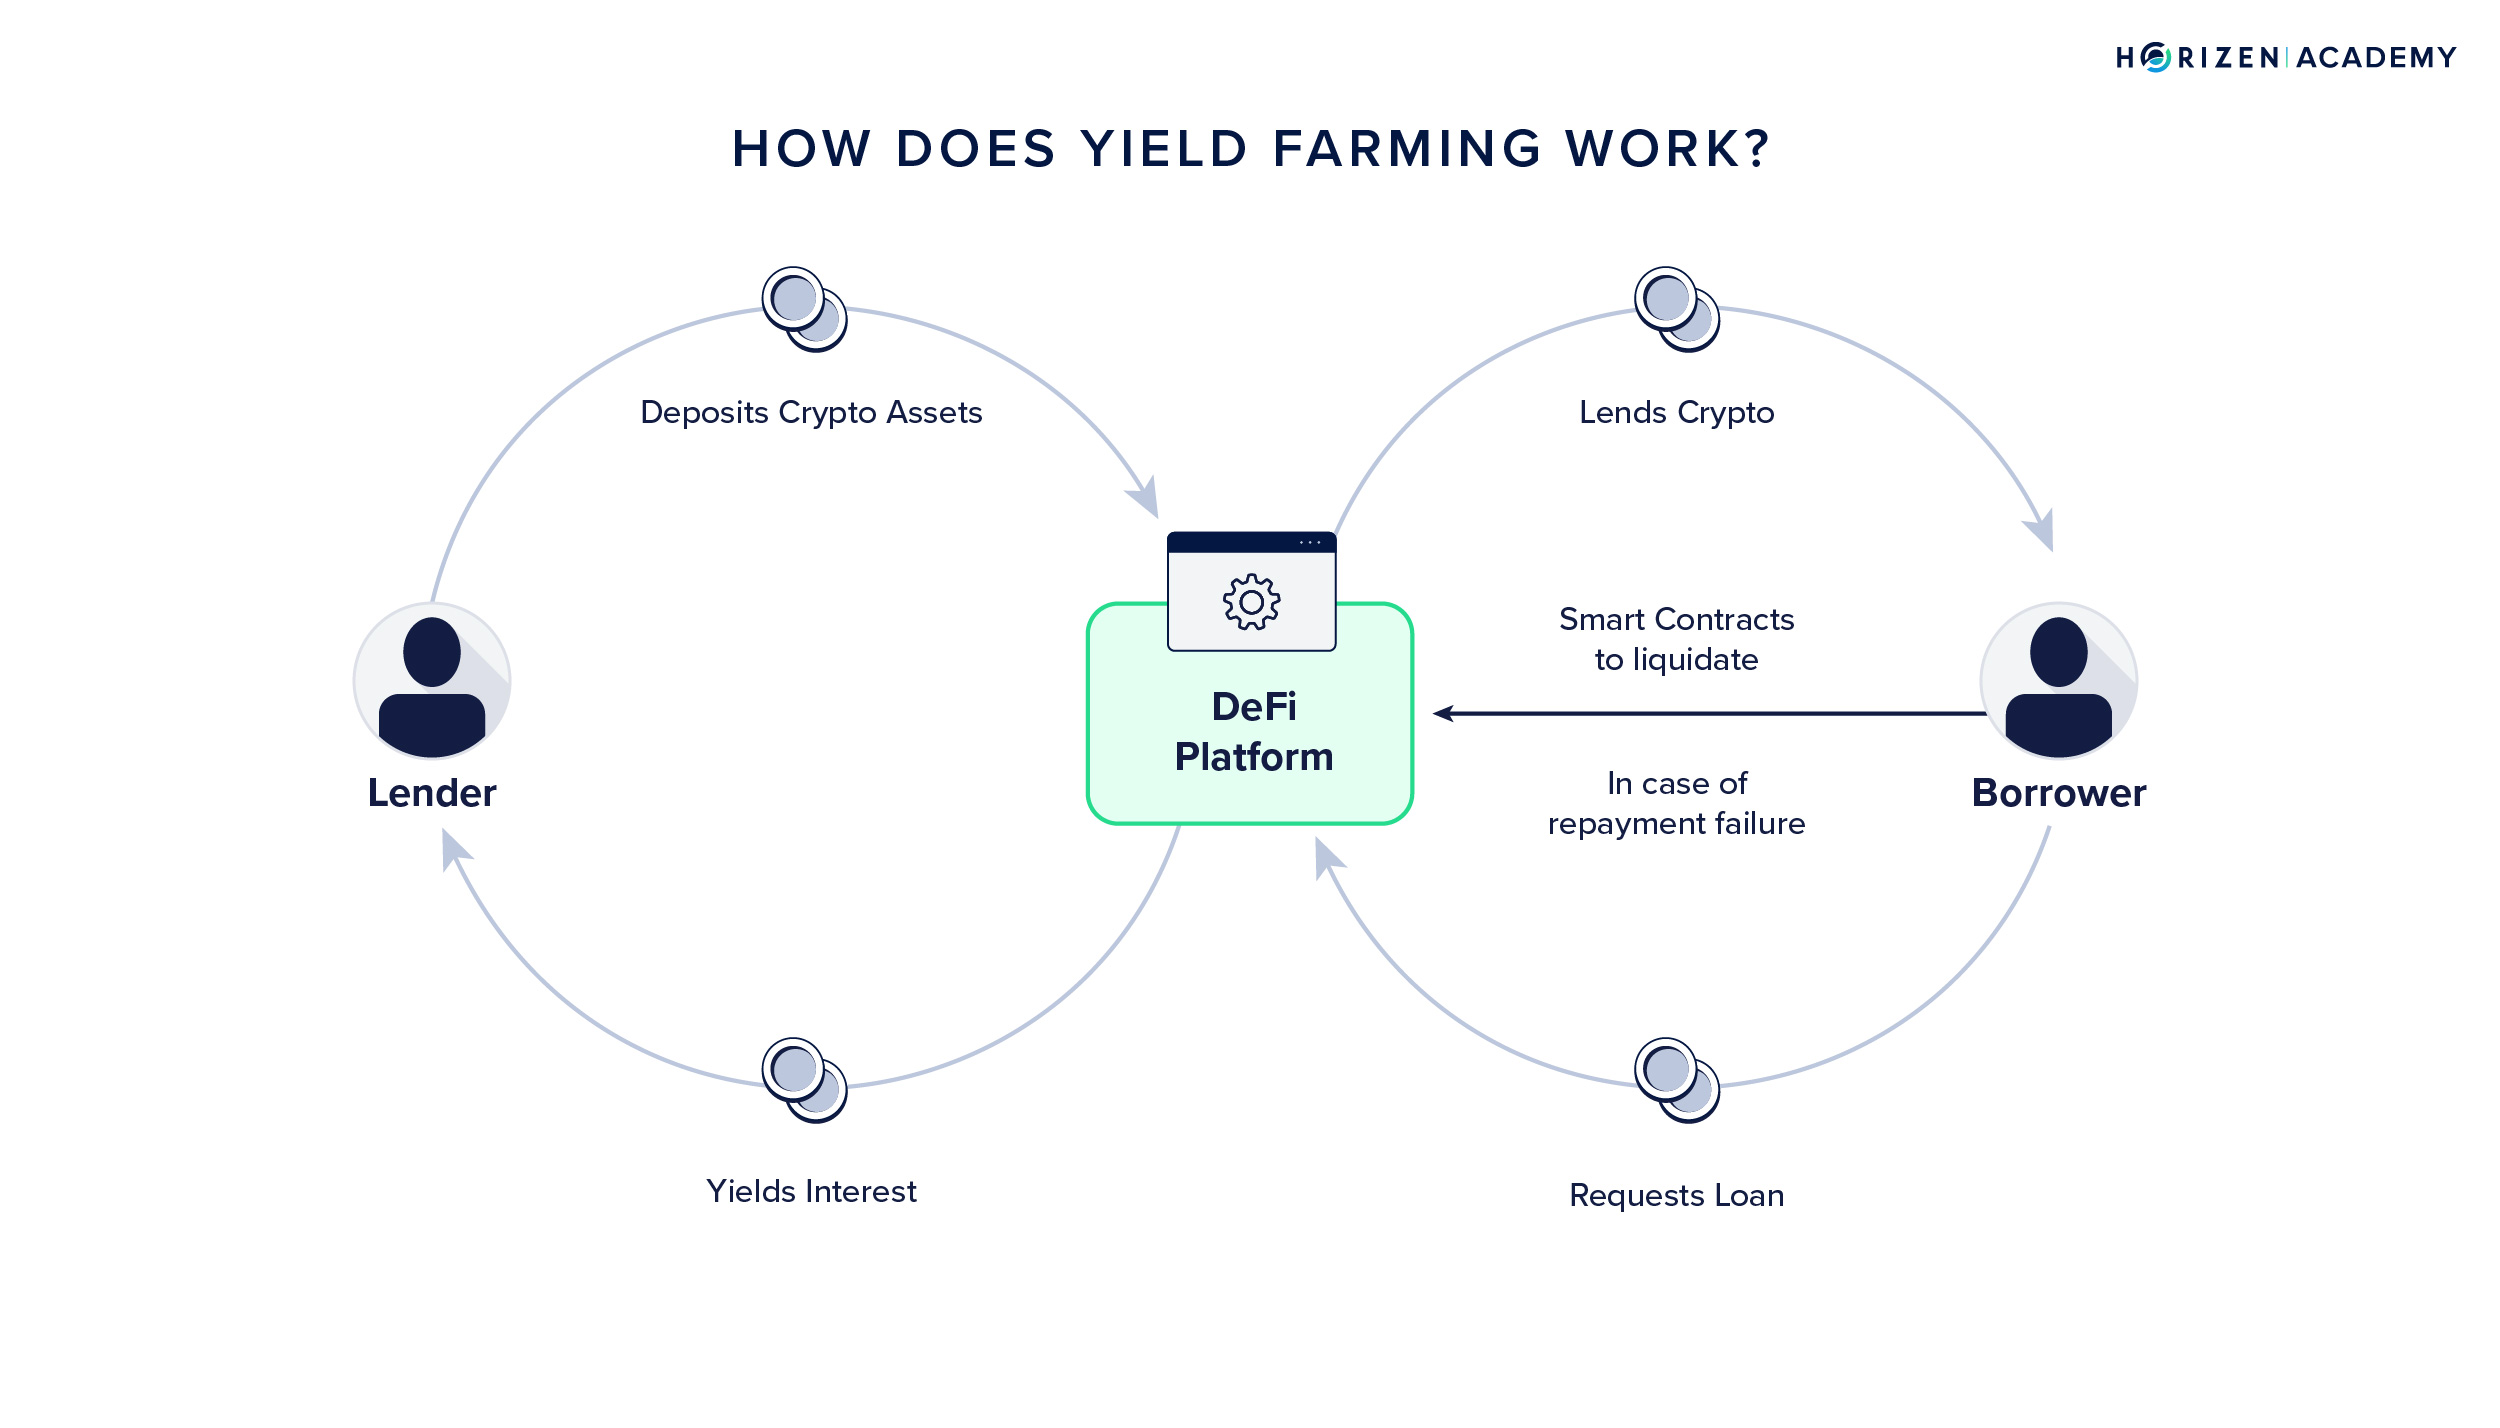 How does Yield farming work